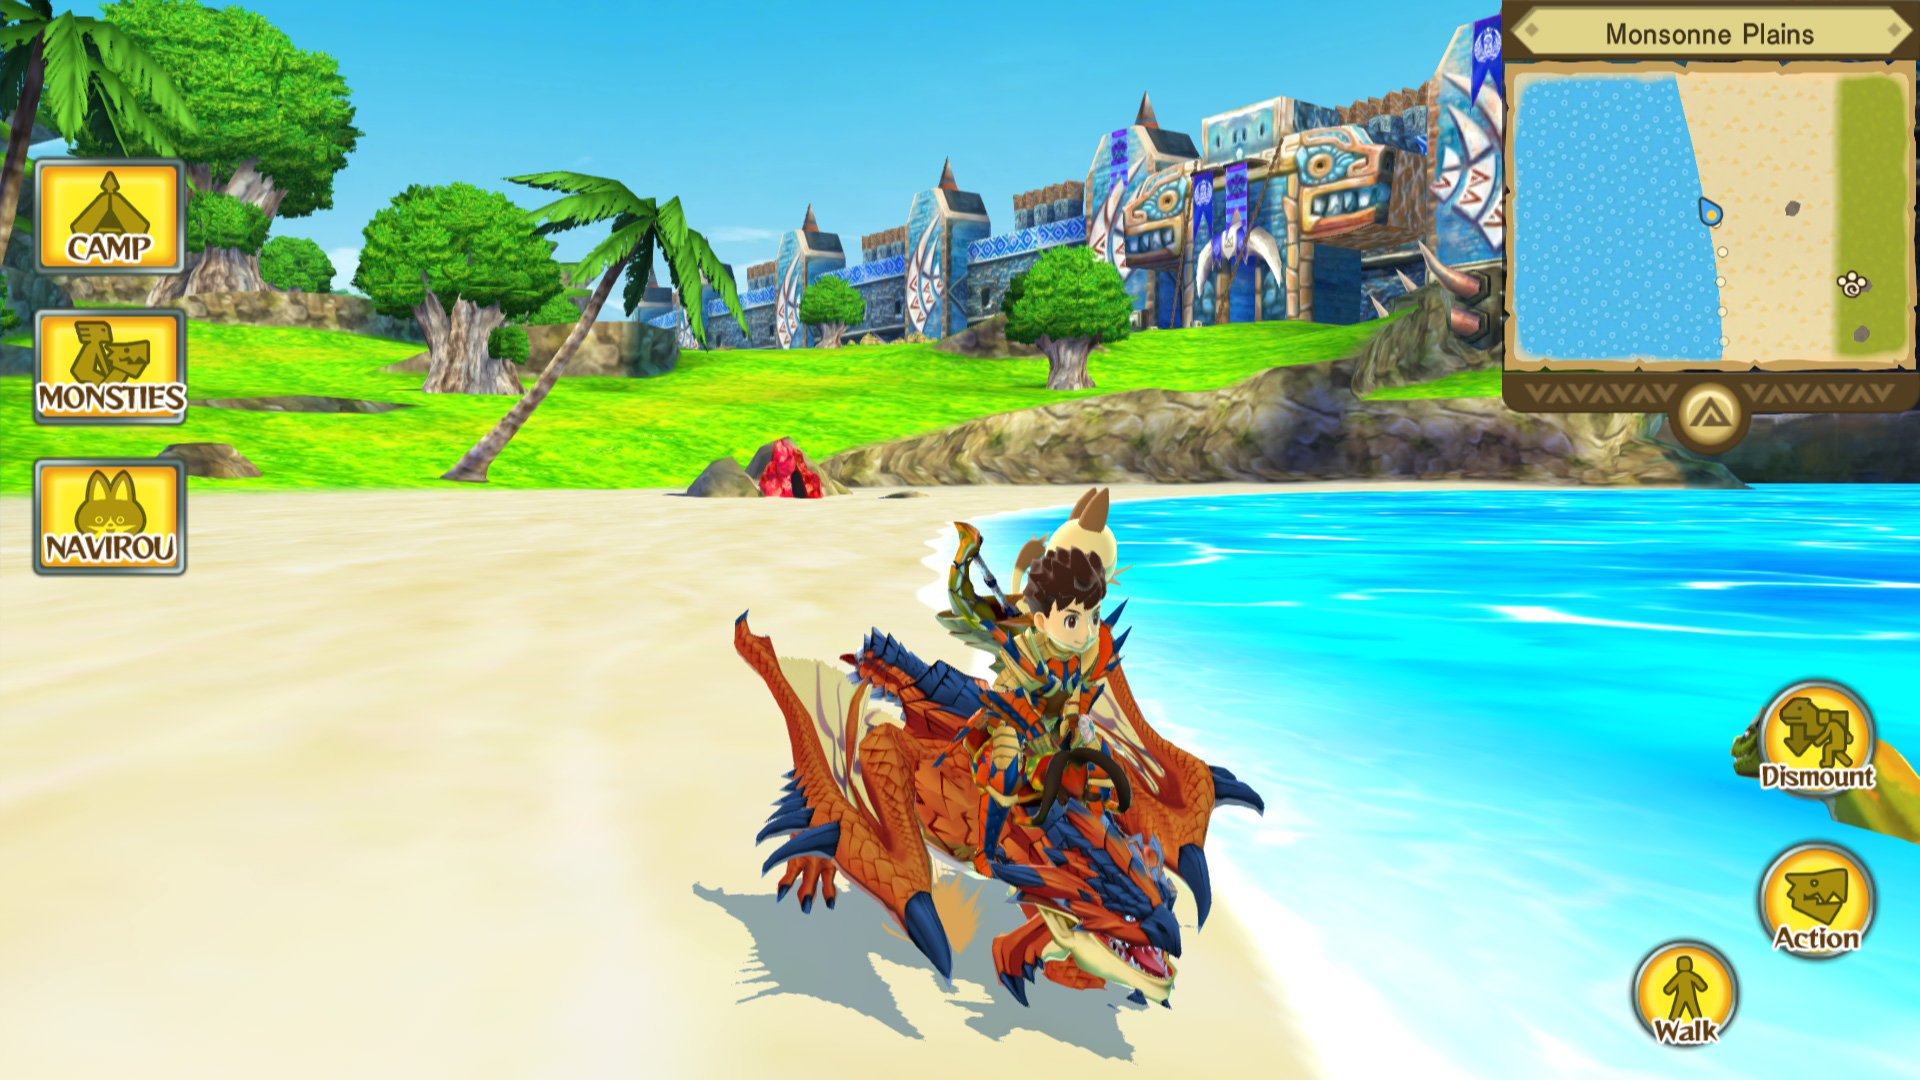 A screenshot from the game Monster Hunter Stories for Apple Arcade